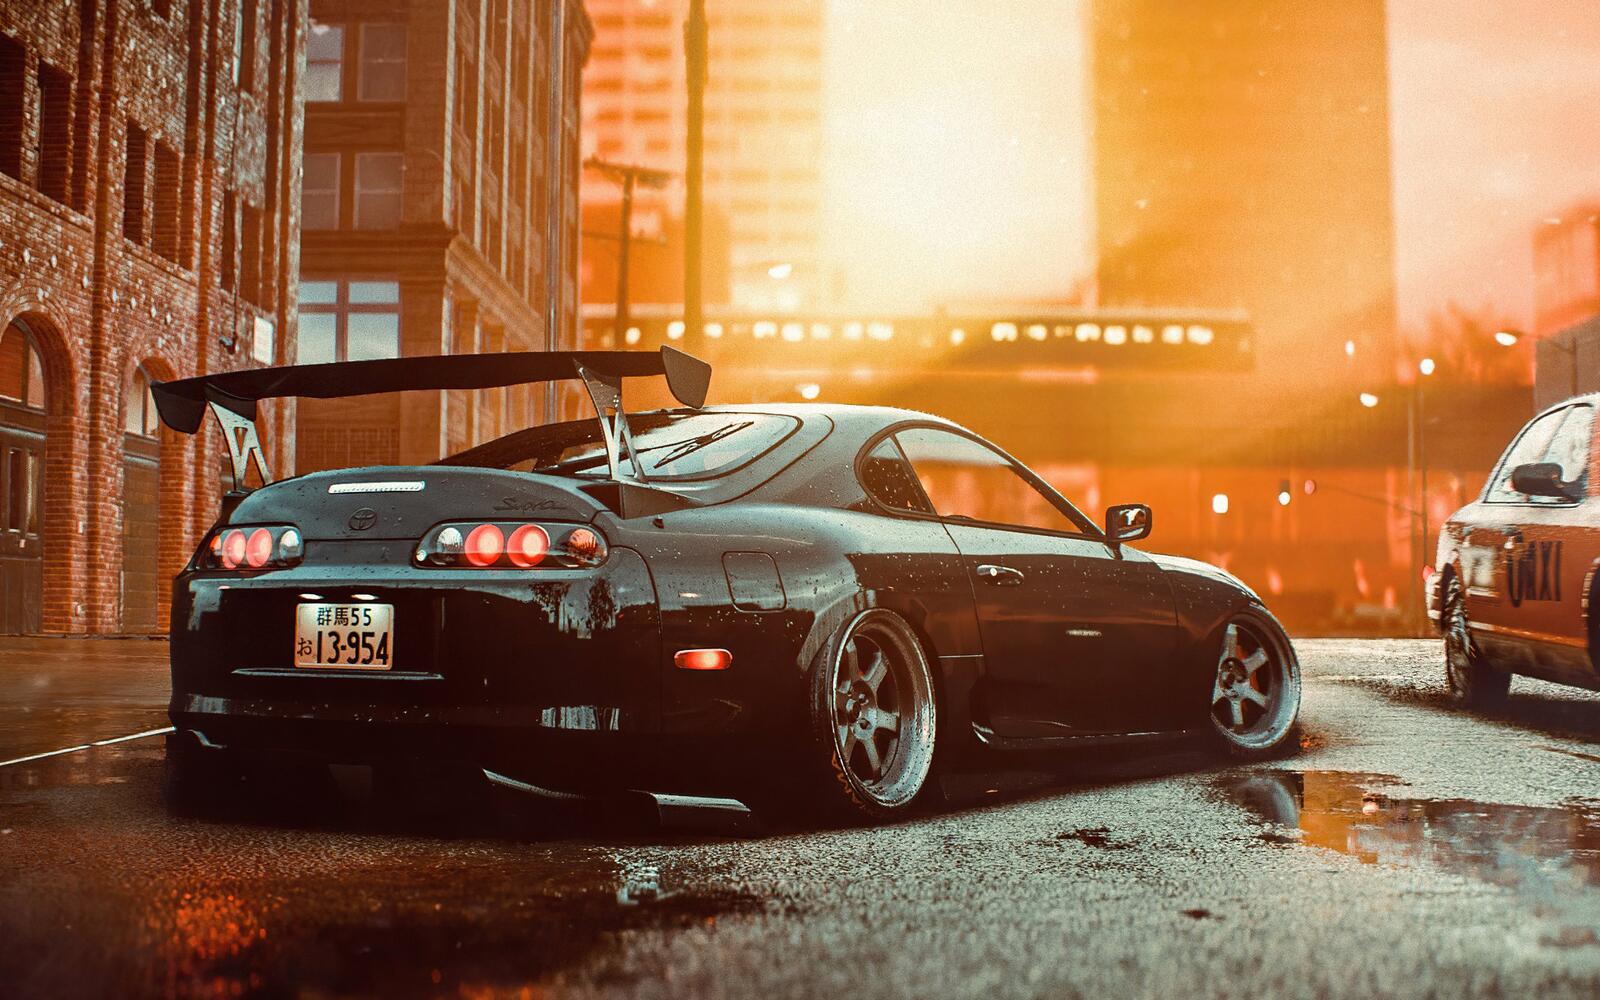 Free photo The rear of a tuned Toyota Supra in the city at sunset